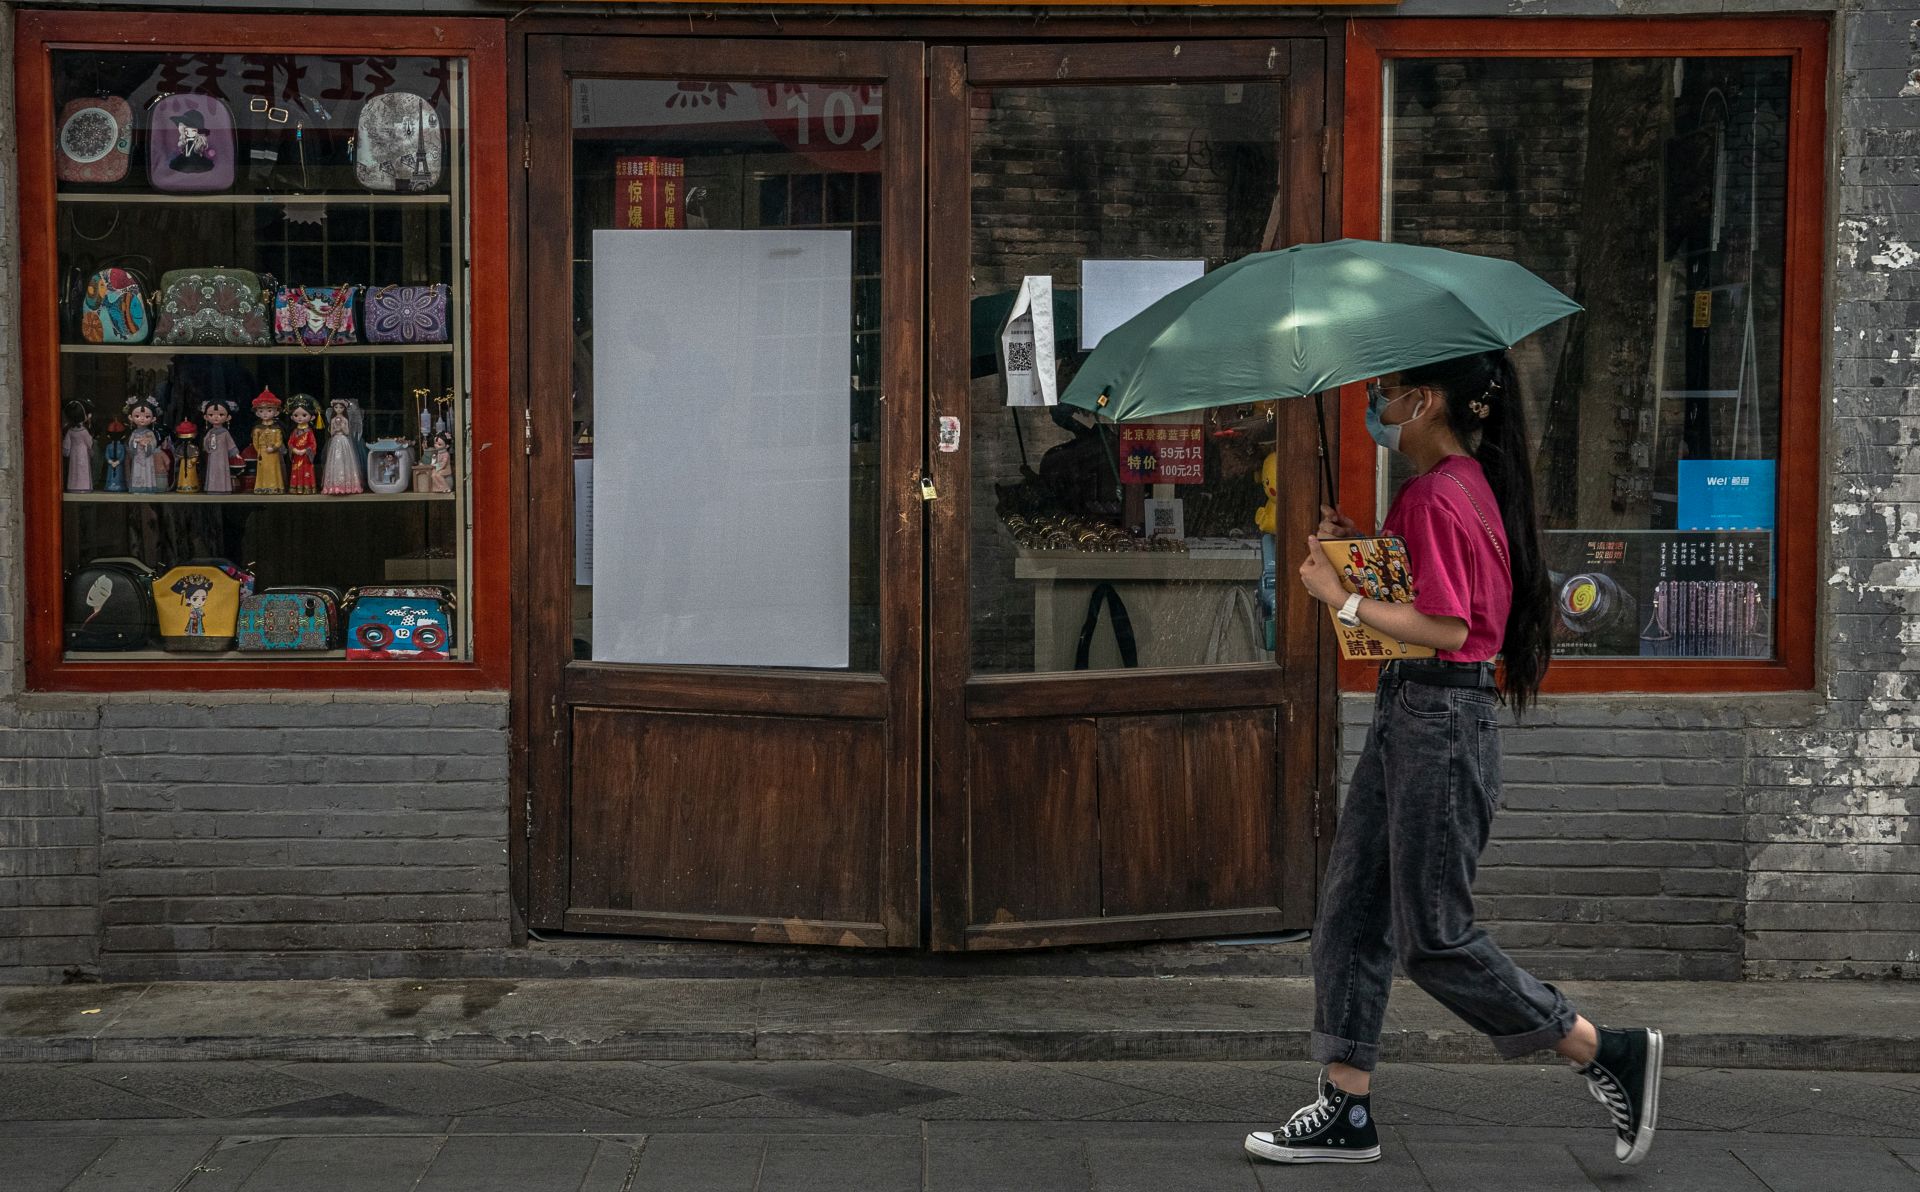 epa08507475 A woman walks past a closed shop in Nanluoguxiang alley, a famous tourist spot in the Hutong neighborhood, amid a new coronavirus outbreak in Beijing, China, 23 June 2020 (issued 25 June 2020). Almost 2.3 million people were tested for COVID-19 since 13 June according to the municipal government.  EPA/ROMAN PILIPEY